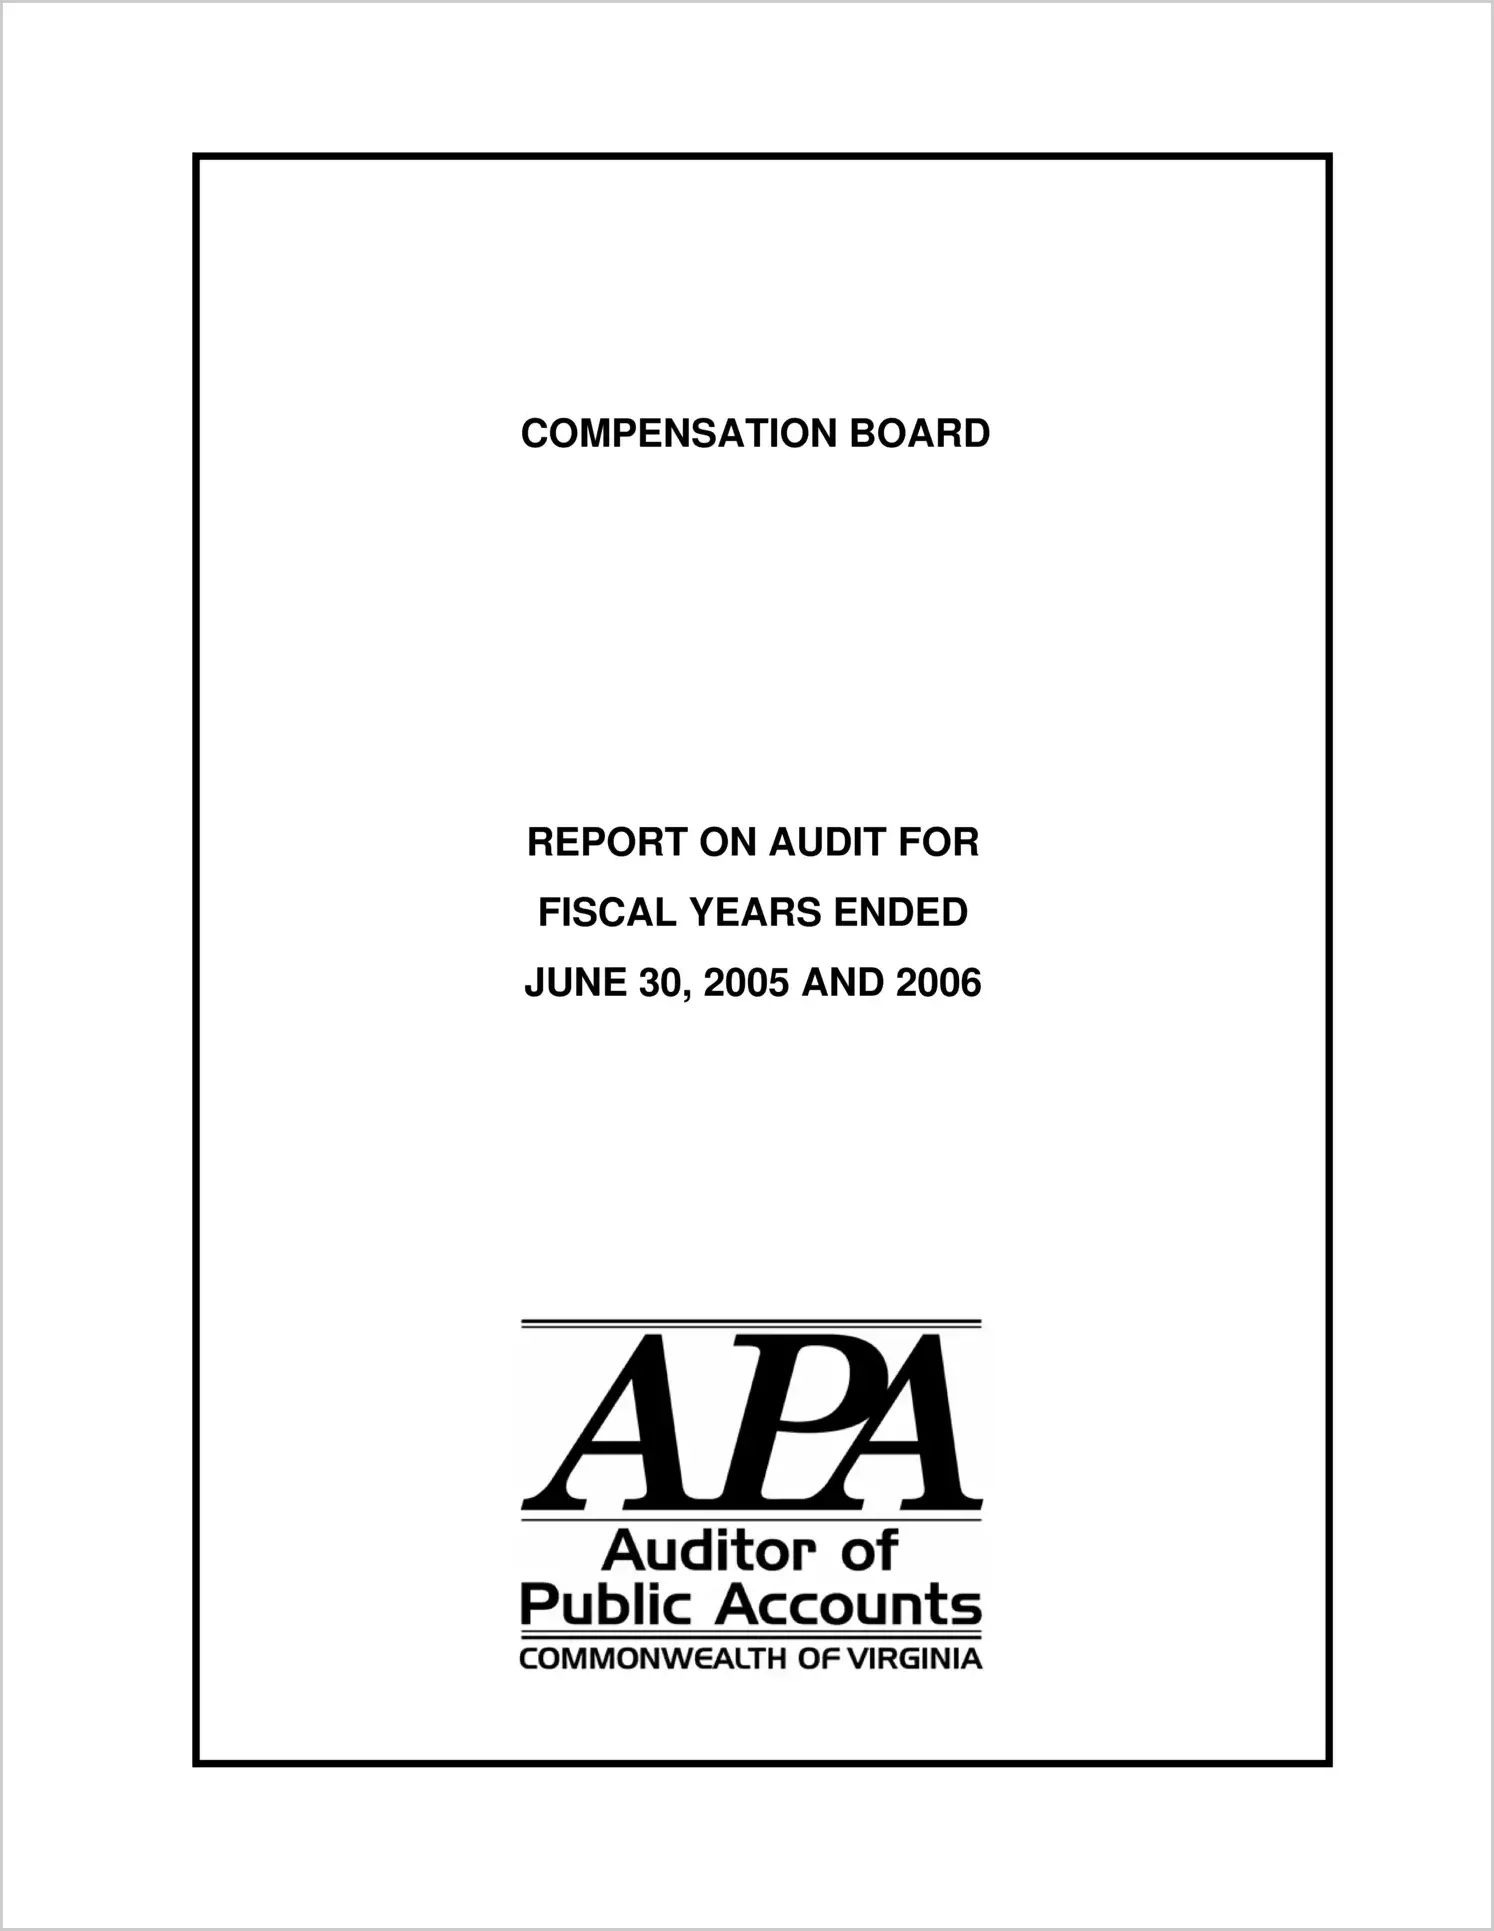 Compensation Board for the Fiscal Years Ended June 30, 2005 and 2006